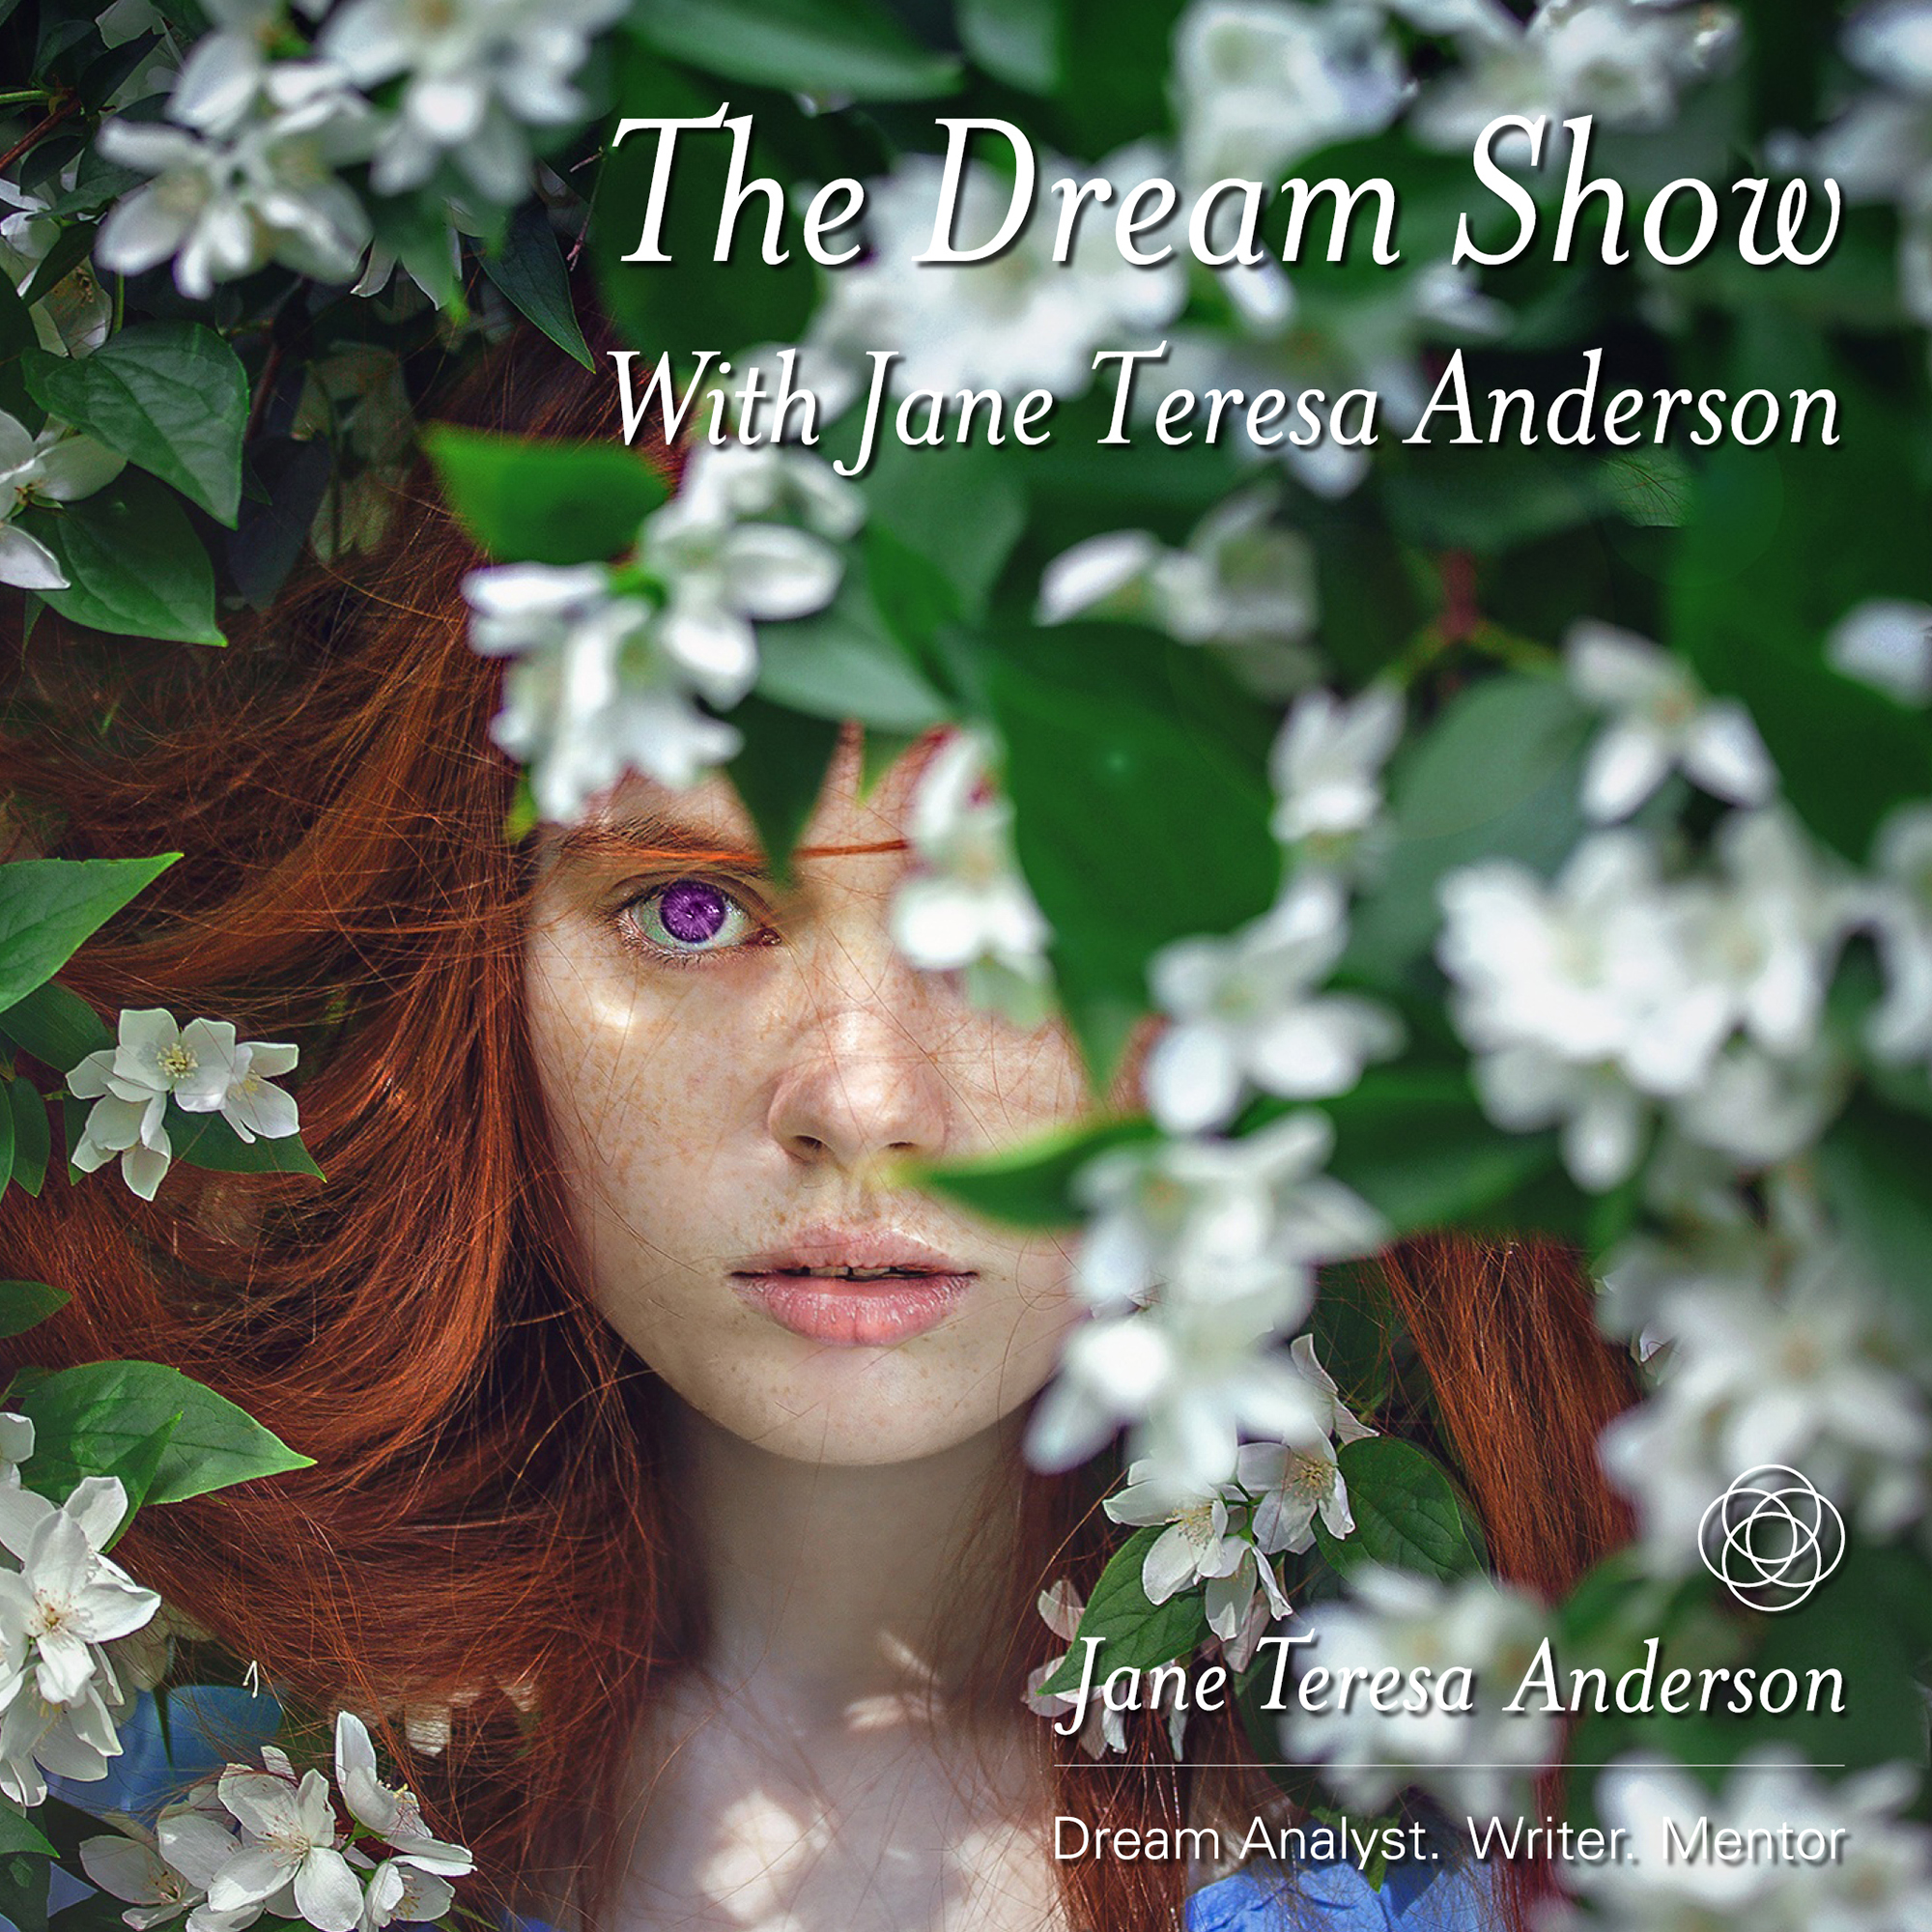 The Dream Show with Jane Teresa Anderson